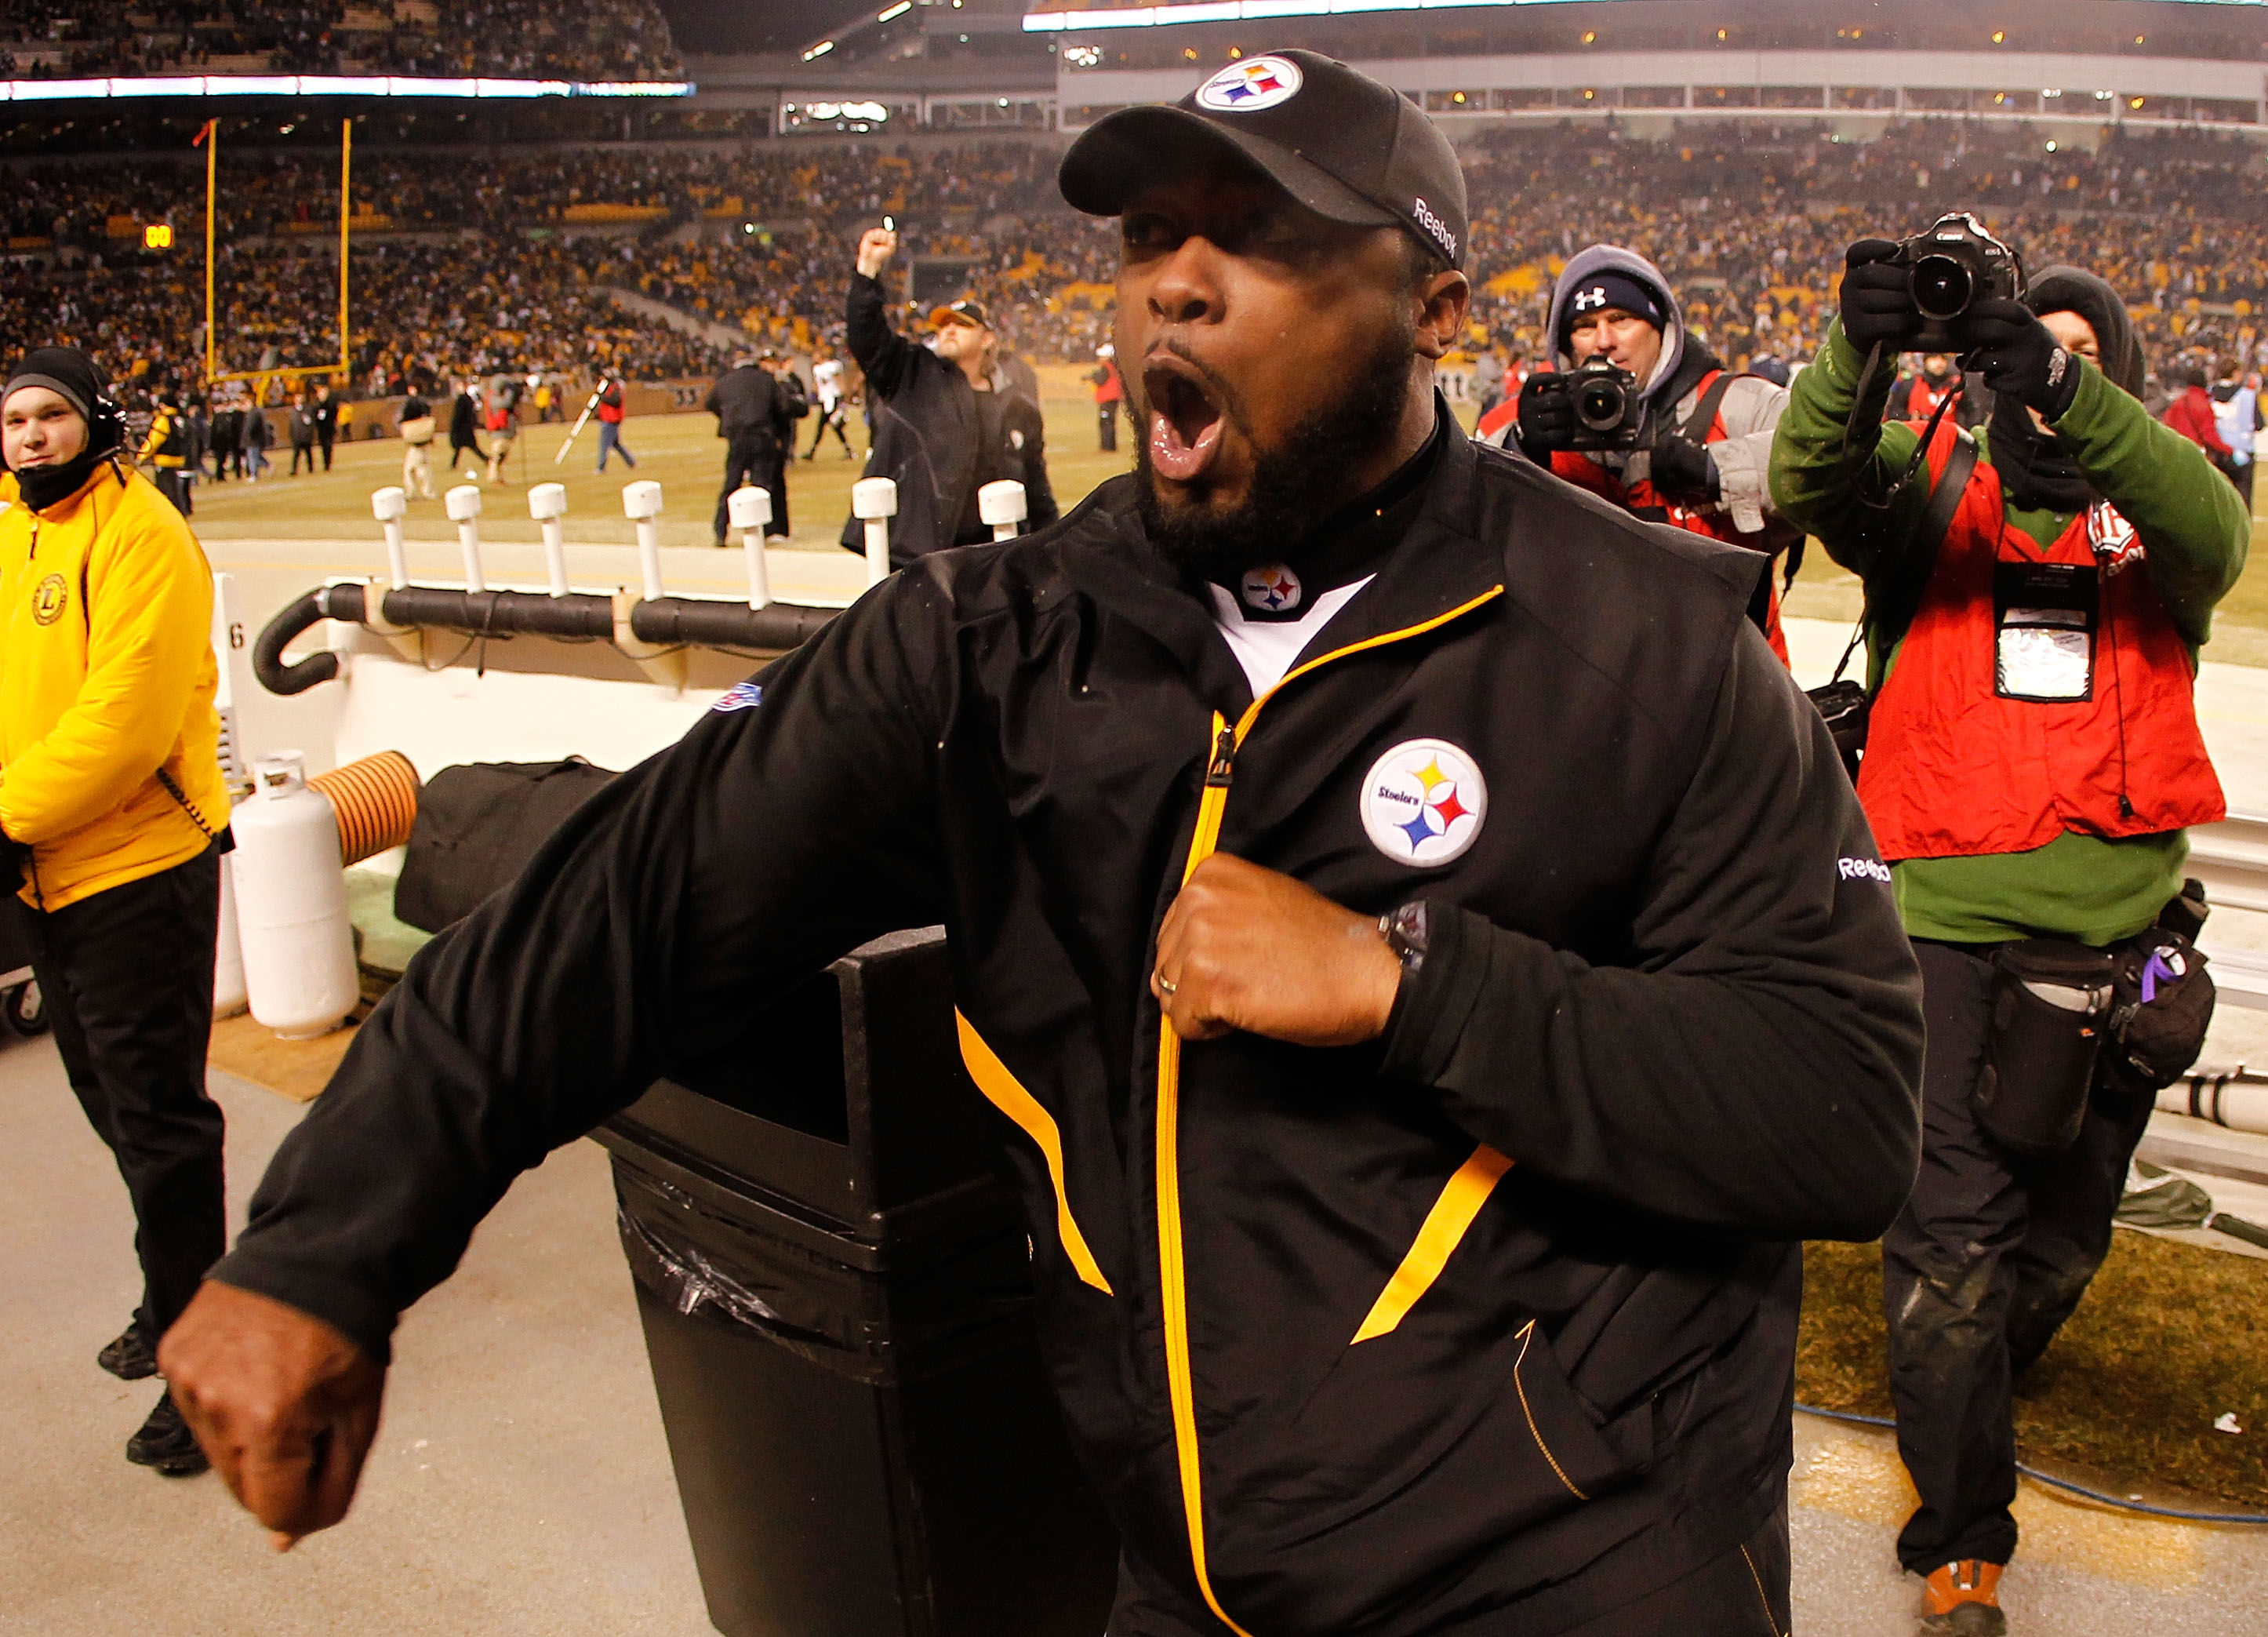 PITTSBURGH, PA - JANUARY 15:  Head coach Mike Tomlin of the Pittsburgh Steelers celebrates after defeating the Baltimore Ravens 31-24 in the AFC Divisional Playoff Game at Heinz Field on January 15, 2011 in Pittsburgh, Pennsylvania.  (Photo by Gregory Sha